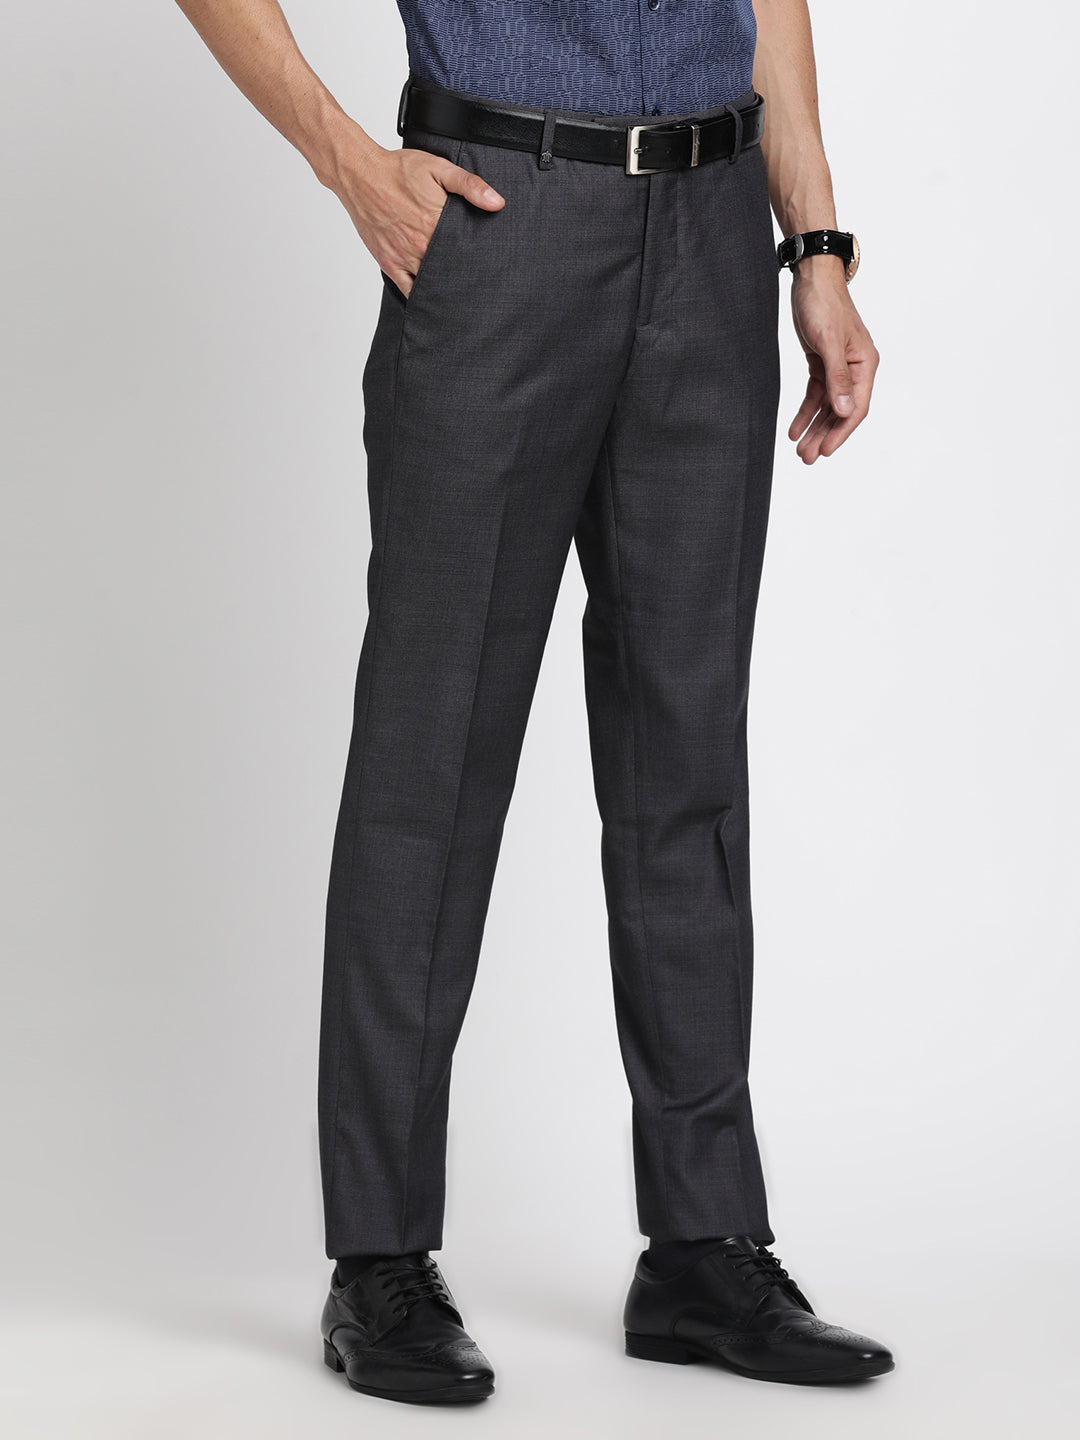 Terry Rayon Charcoal Plain Slim Fit Flat Front Formal Trouser